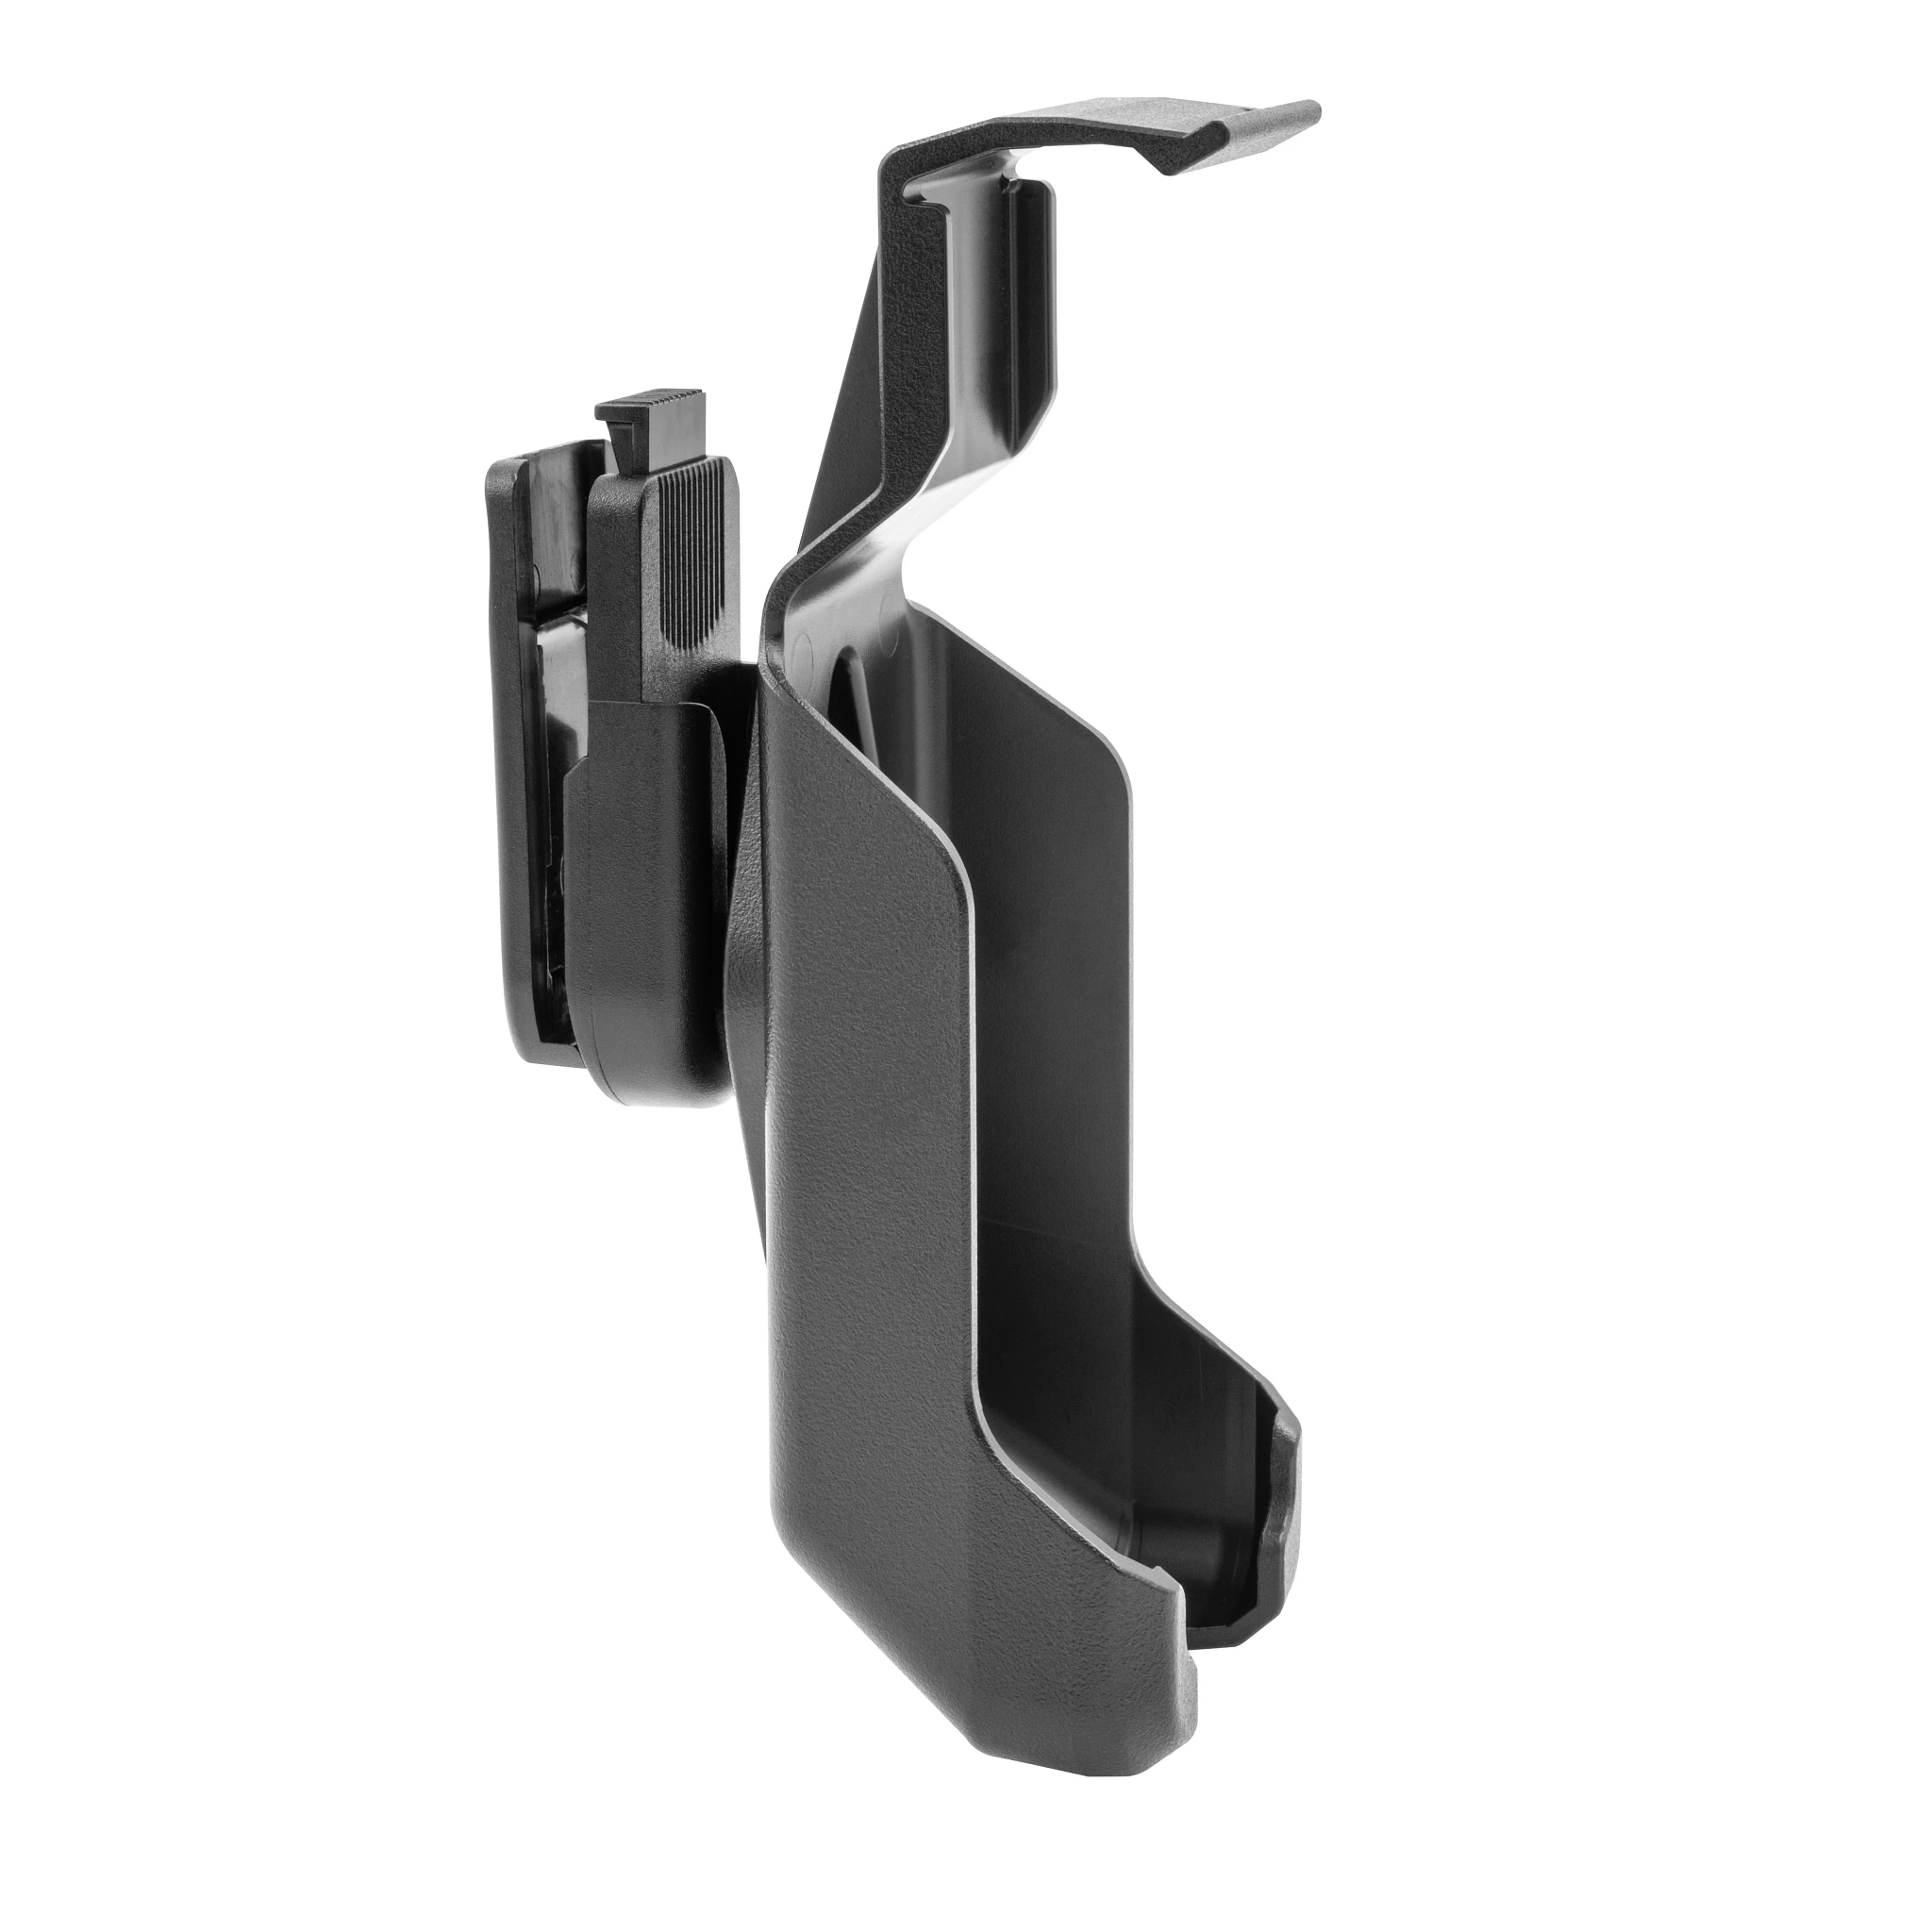 Advanced GPS Navigation Wireless Remote Cradle shown from the side with the clip attached